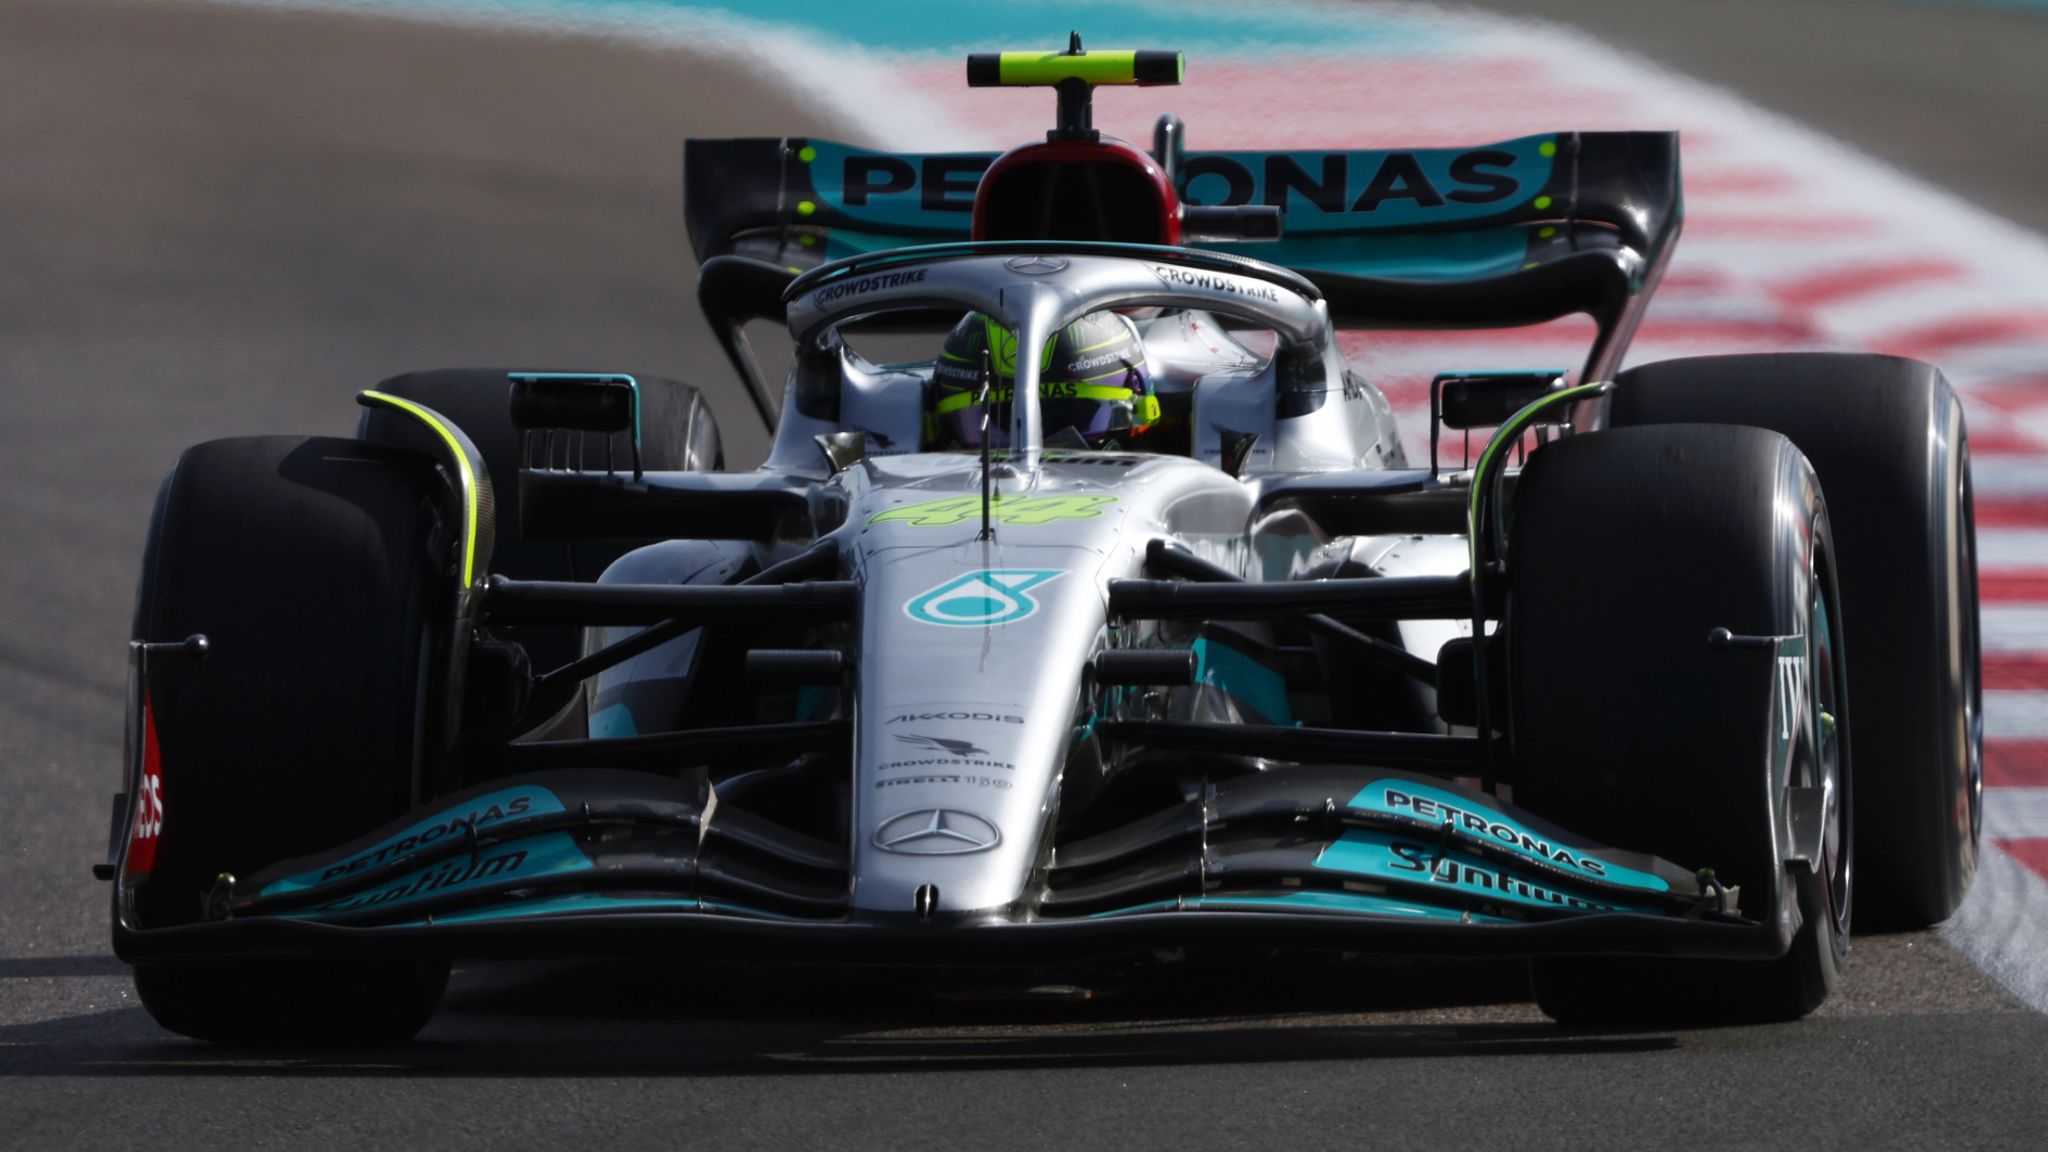 Abu Dhabi GP Lewis Hamilton tops George Russell as Mercedes seal one-two in Practice One F1 News